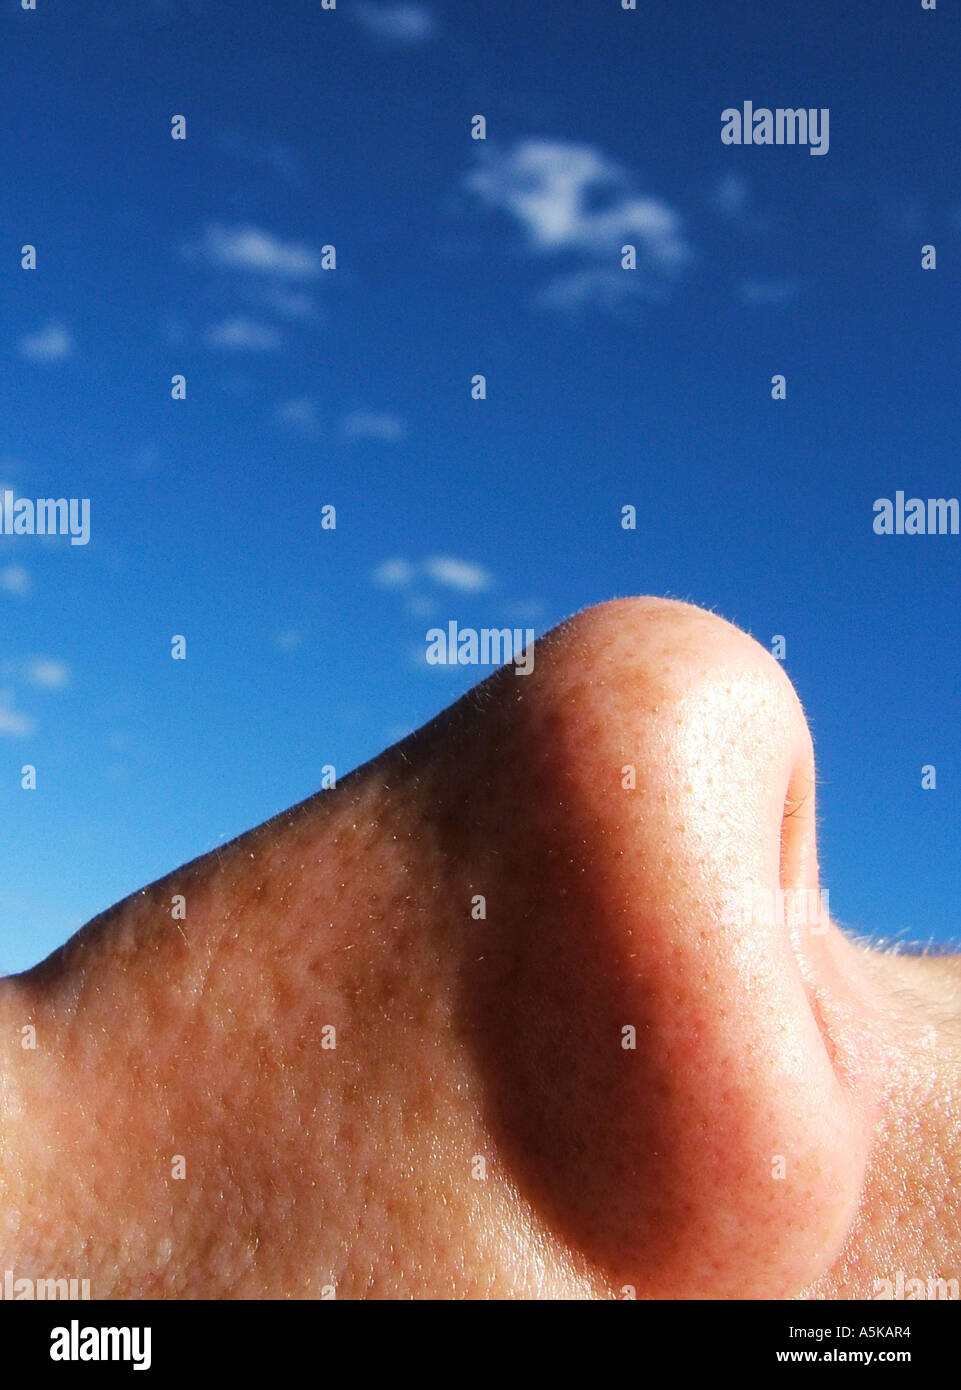 Detail of a nose. Stock Photo